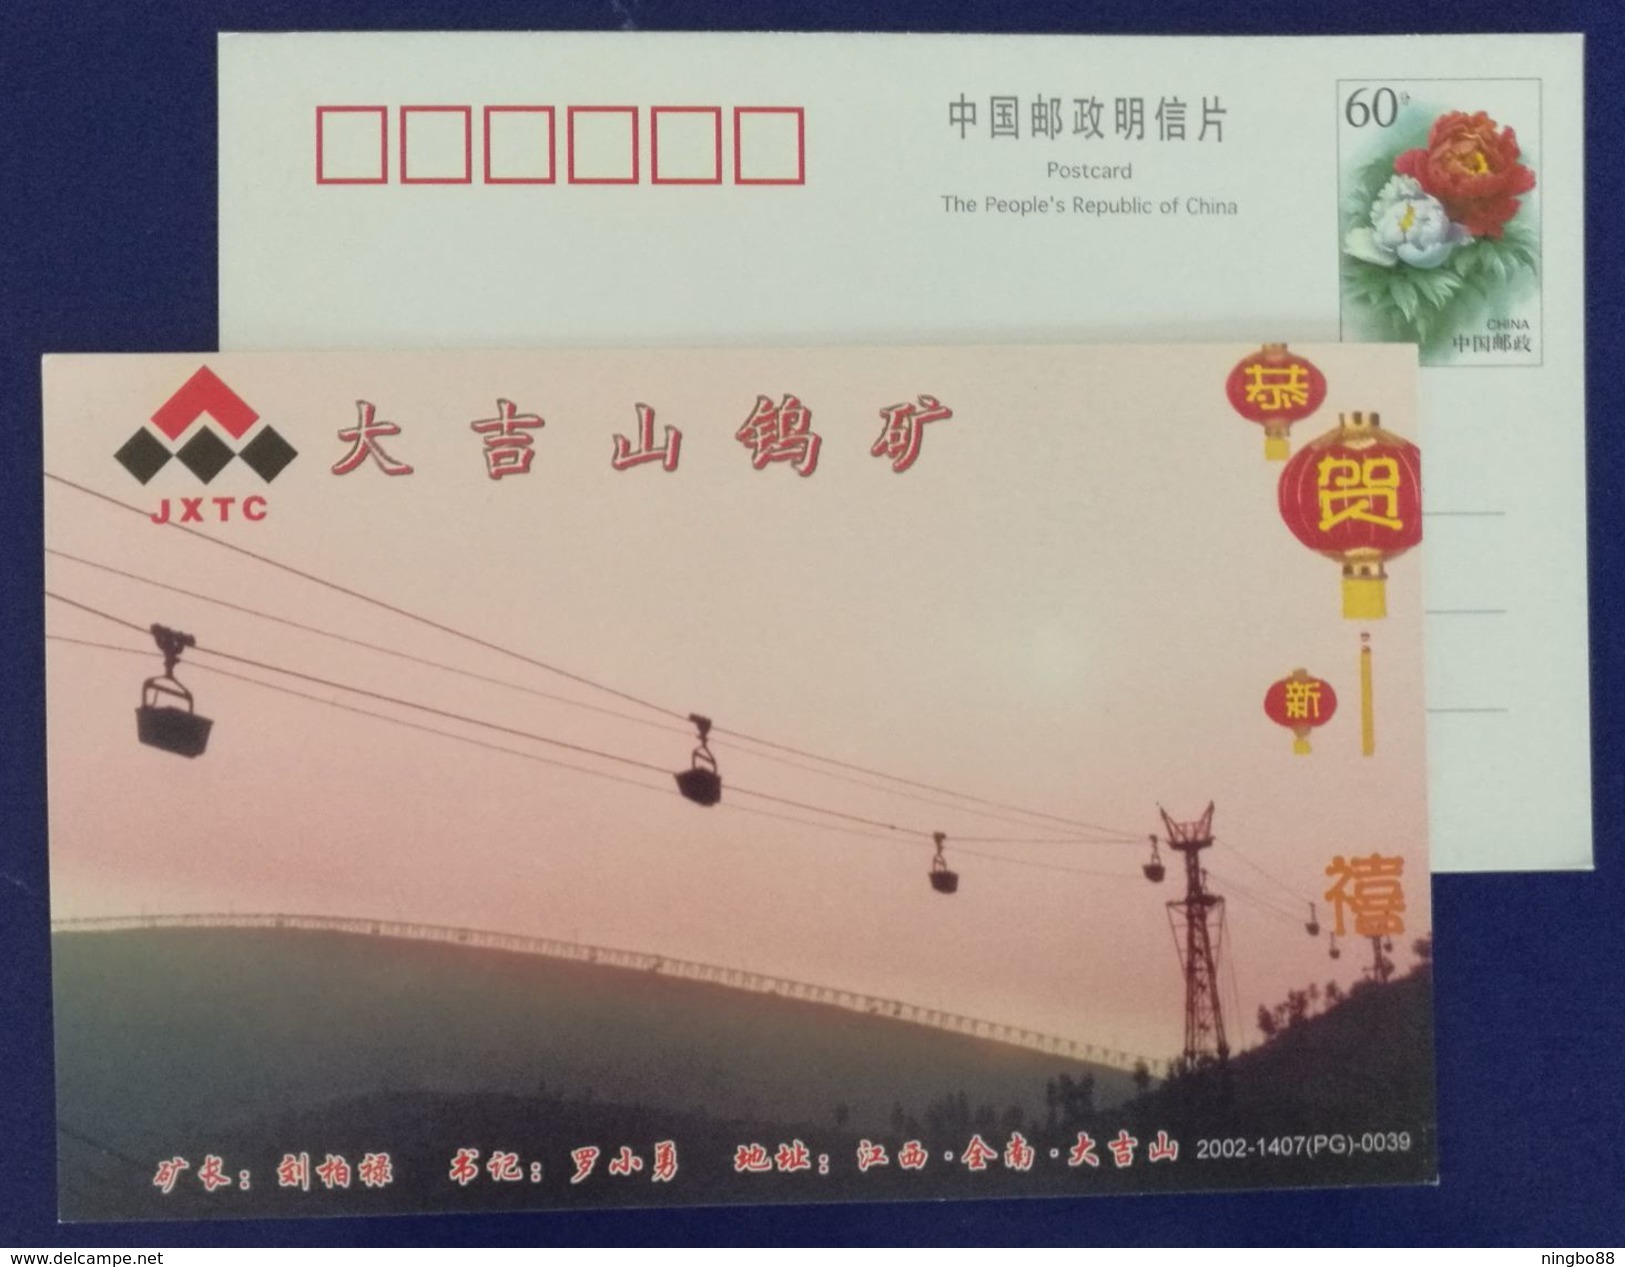 Mineral Ore Telautomatics Overhead Transmitting Cable Car,China 2002 Mt.dajishan Tungsten Moine Advert Pre-stamped Card - Minerals